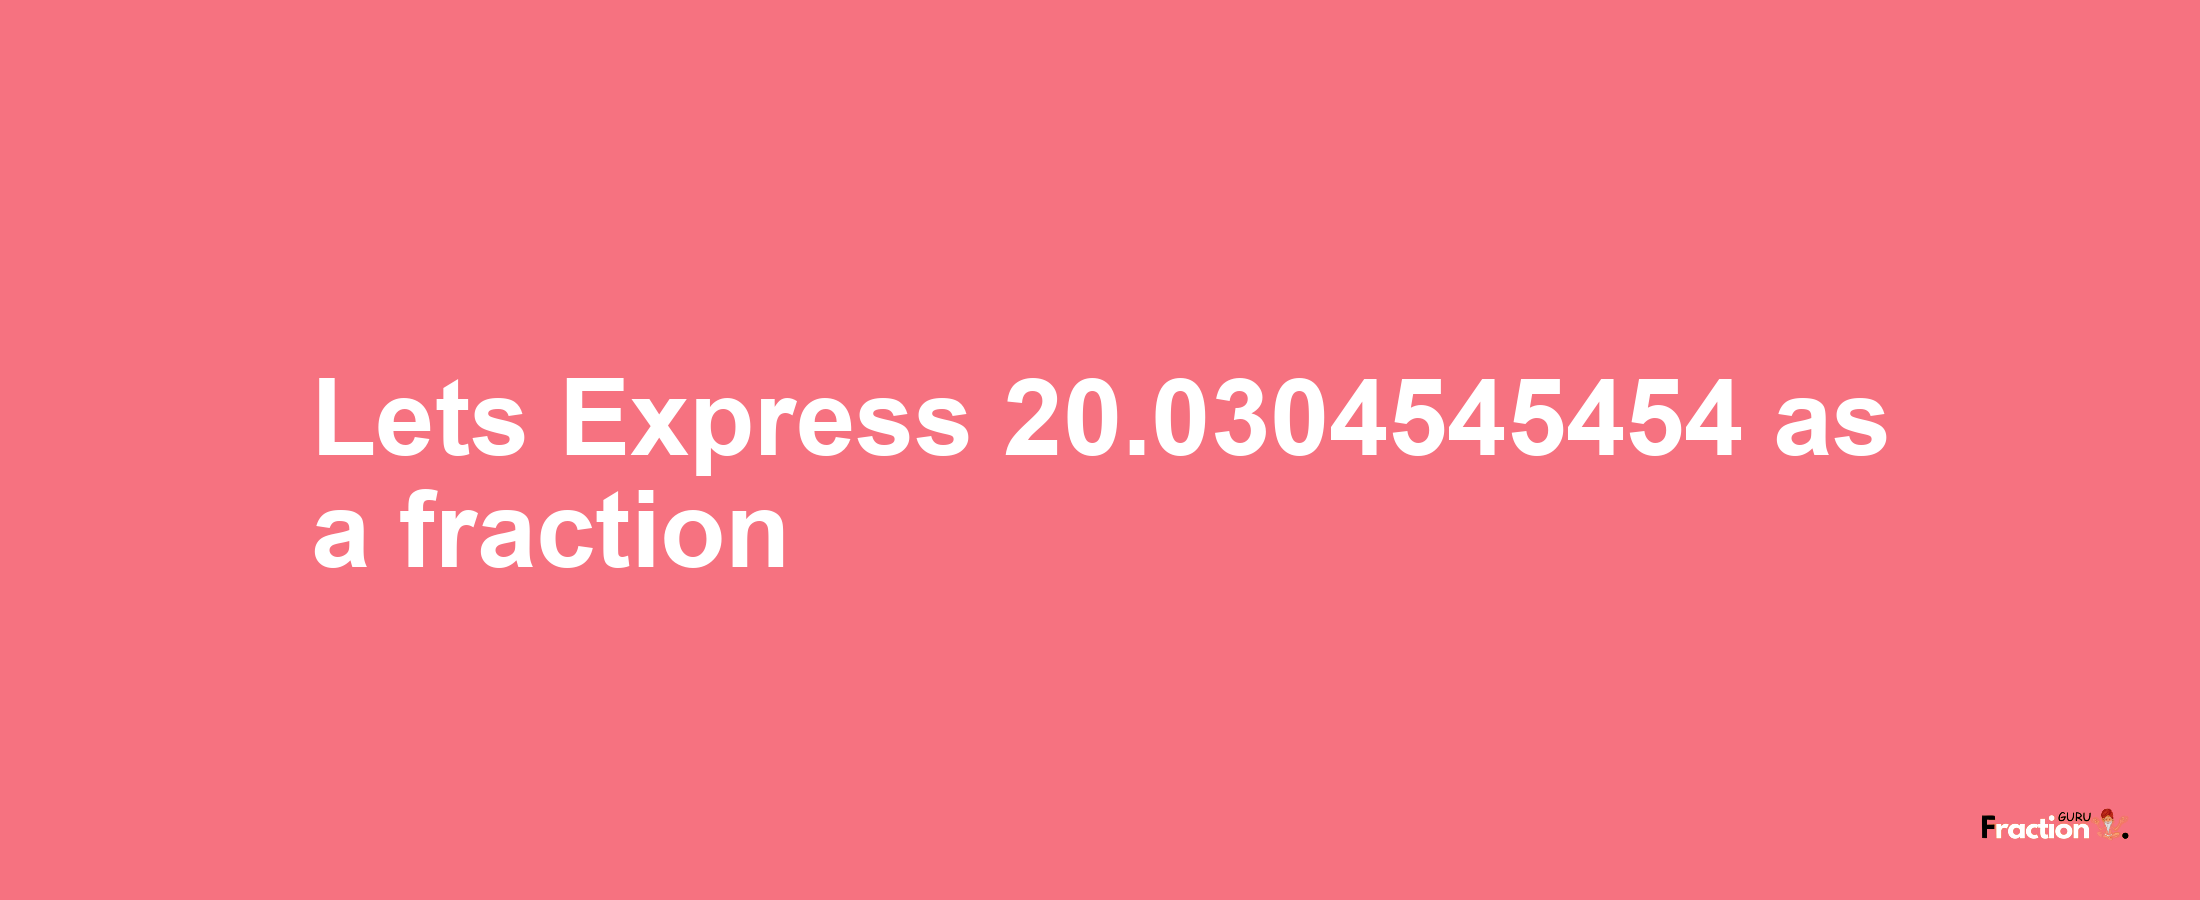 Lets Express 20.0304545454 as afraction